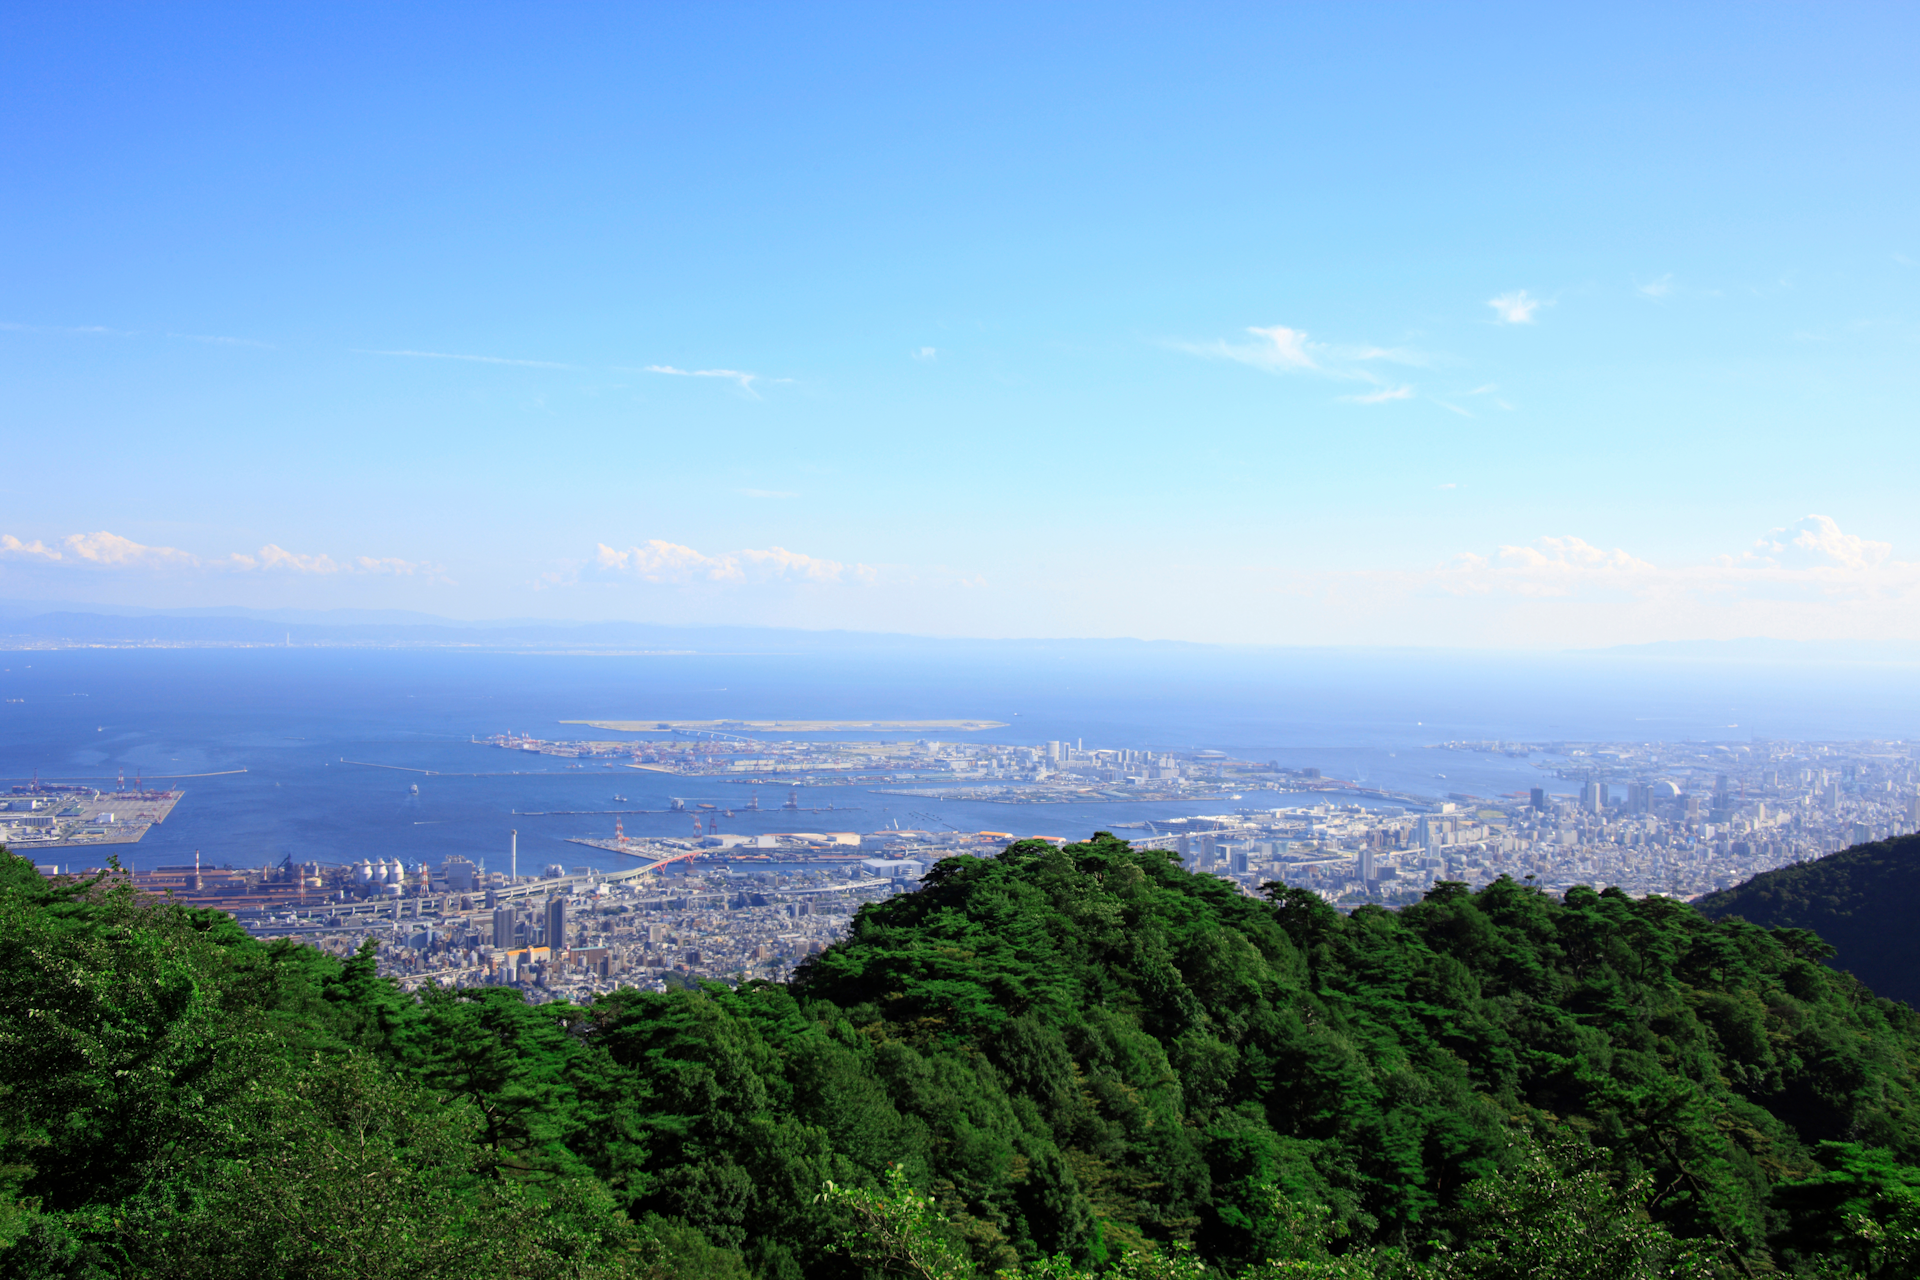 The beautiful view from the Rokko mountains in Kobe City, Hyogo Prefecture